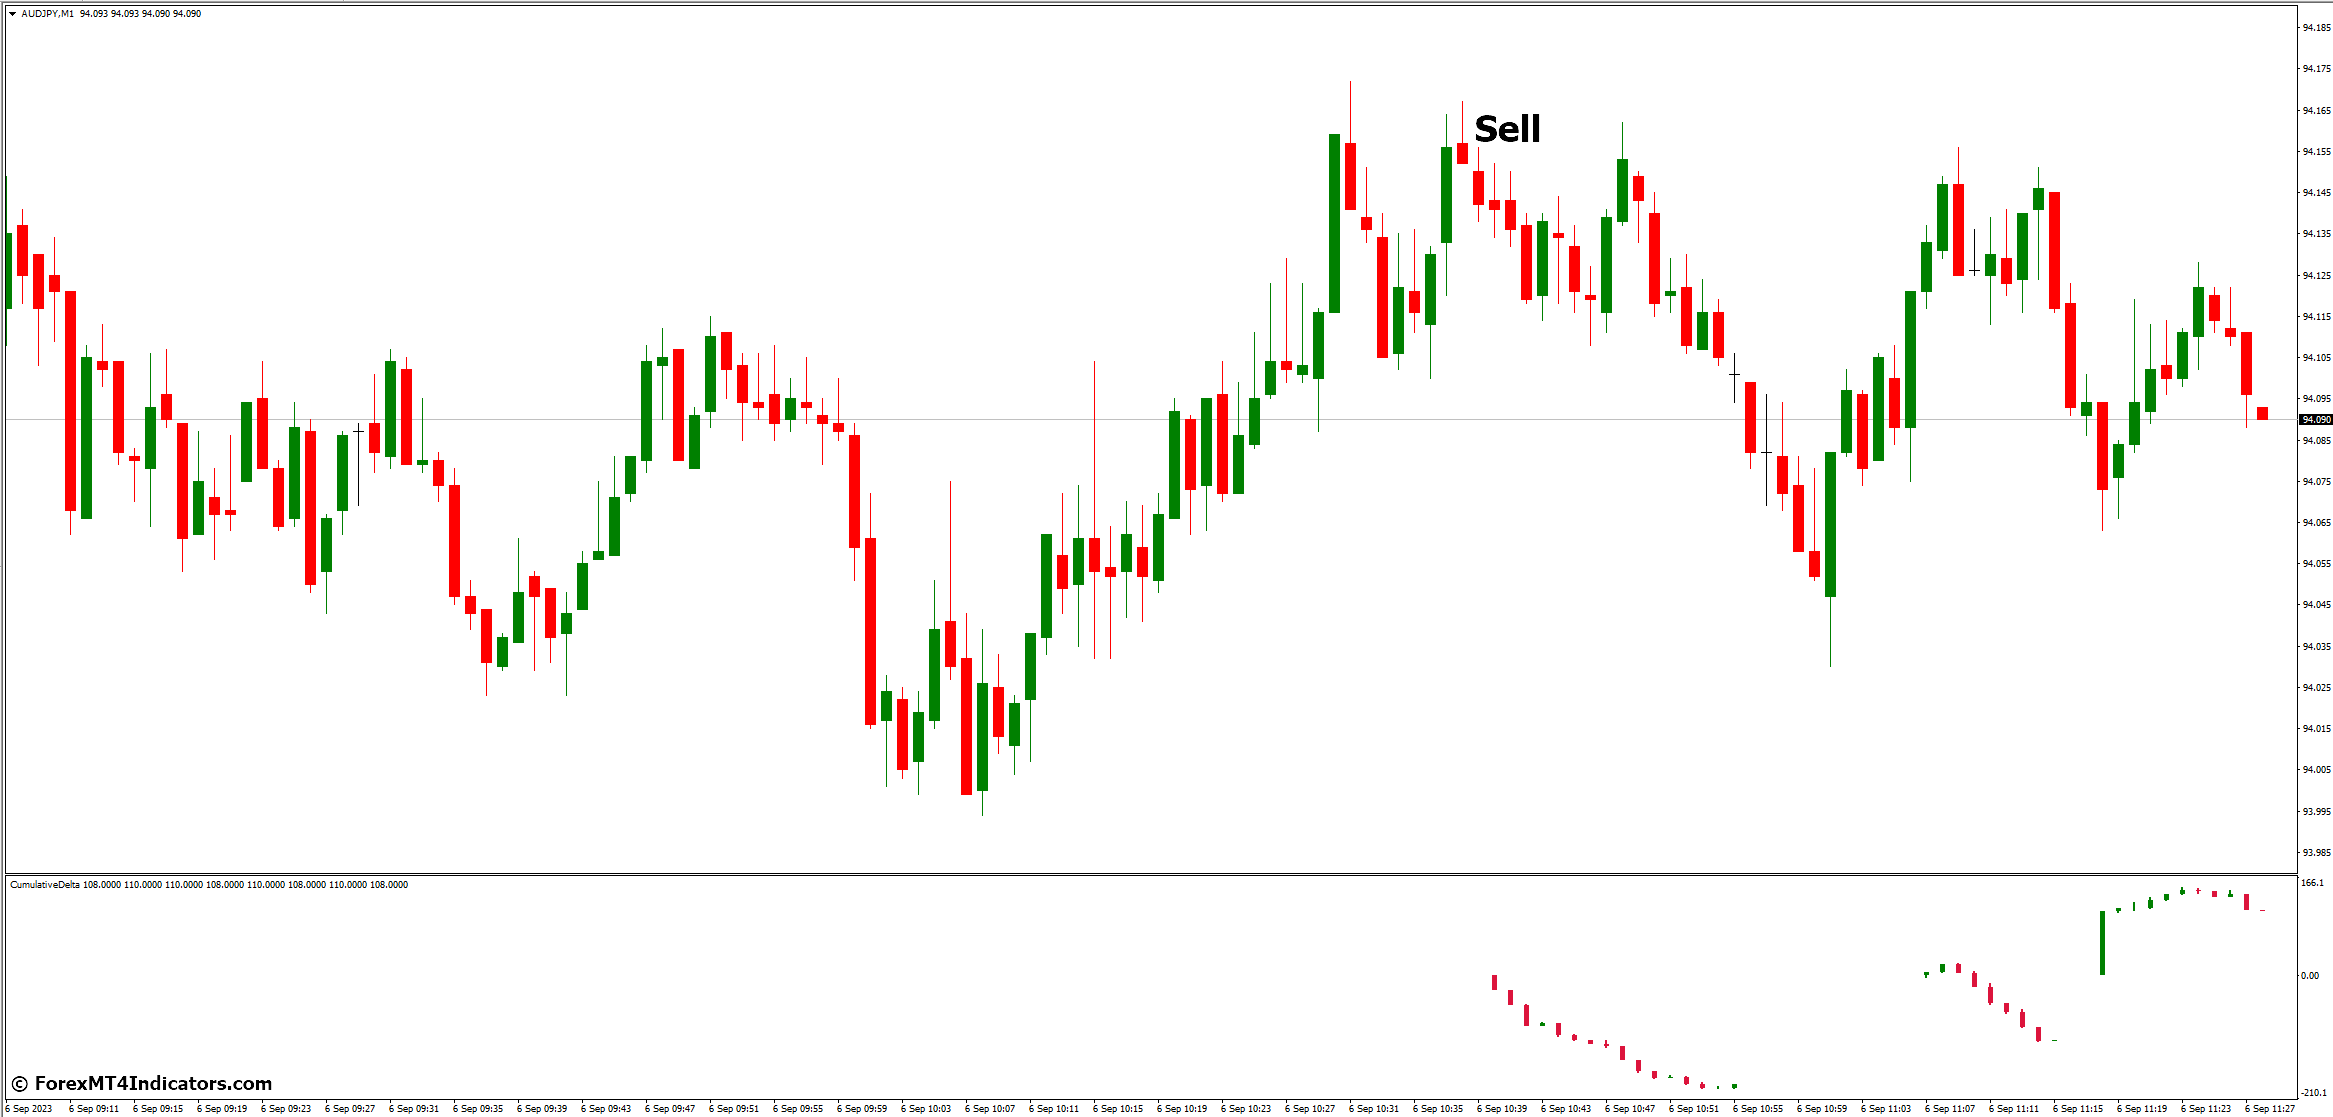 How to Trade with Cumulative Delta MT4 Indicator - Sell Entry